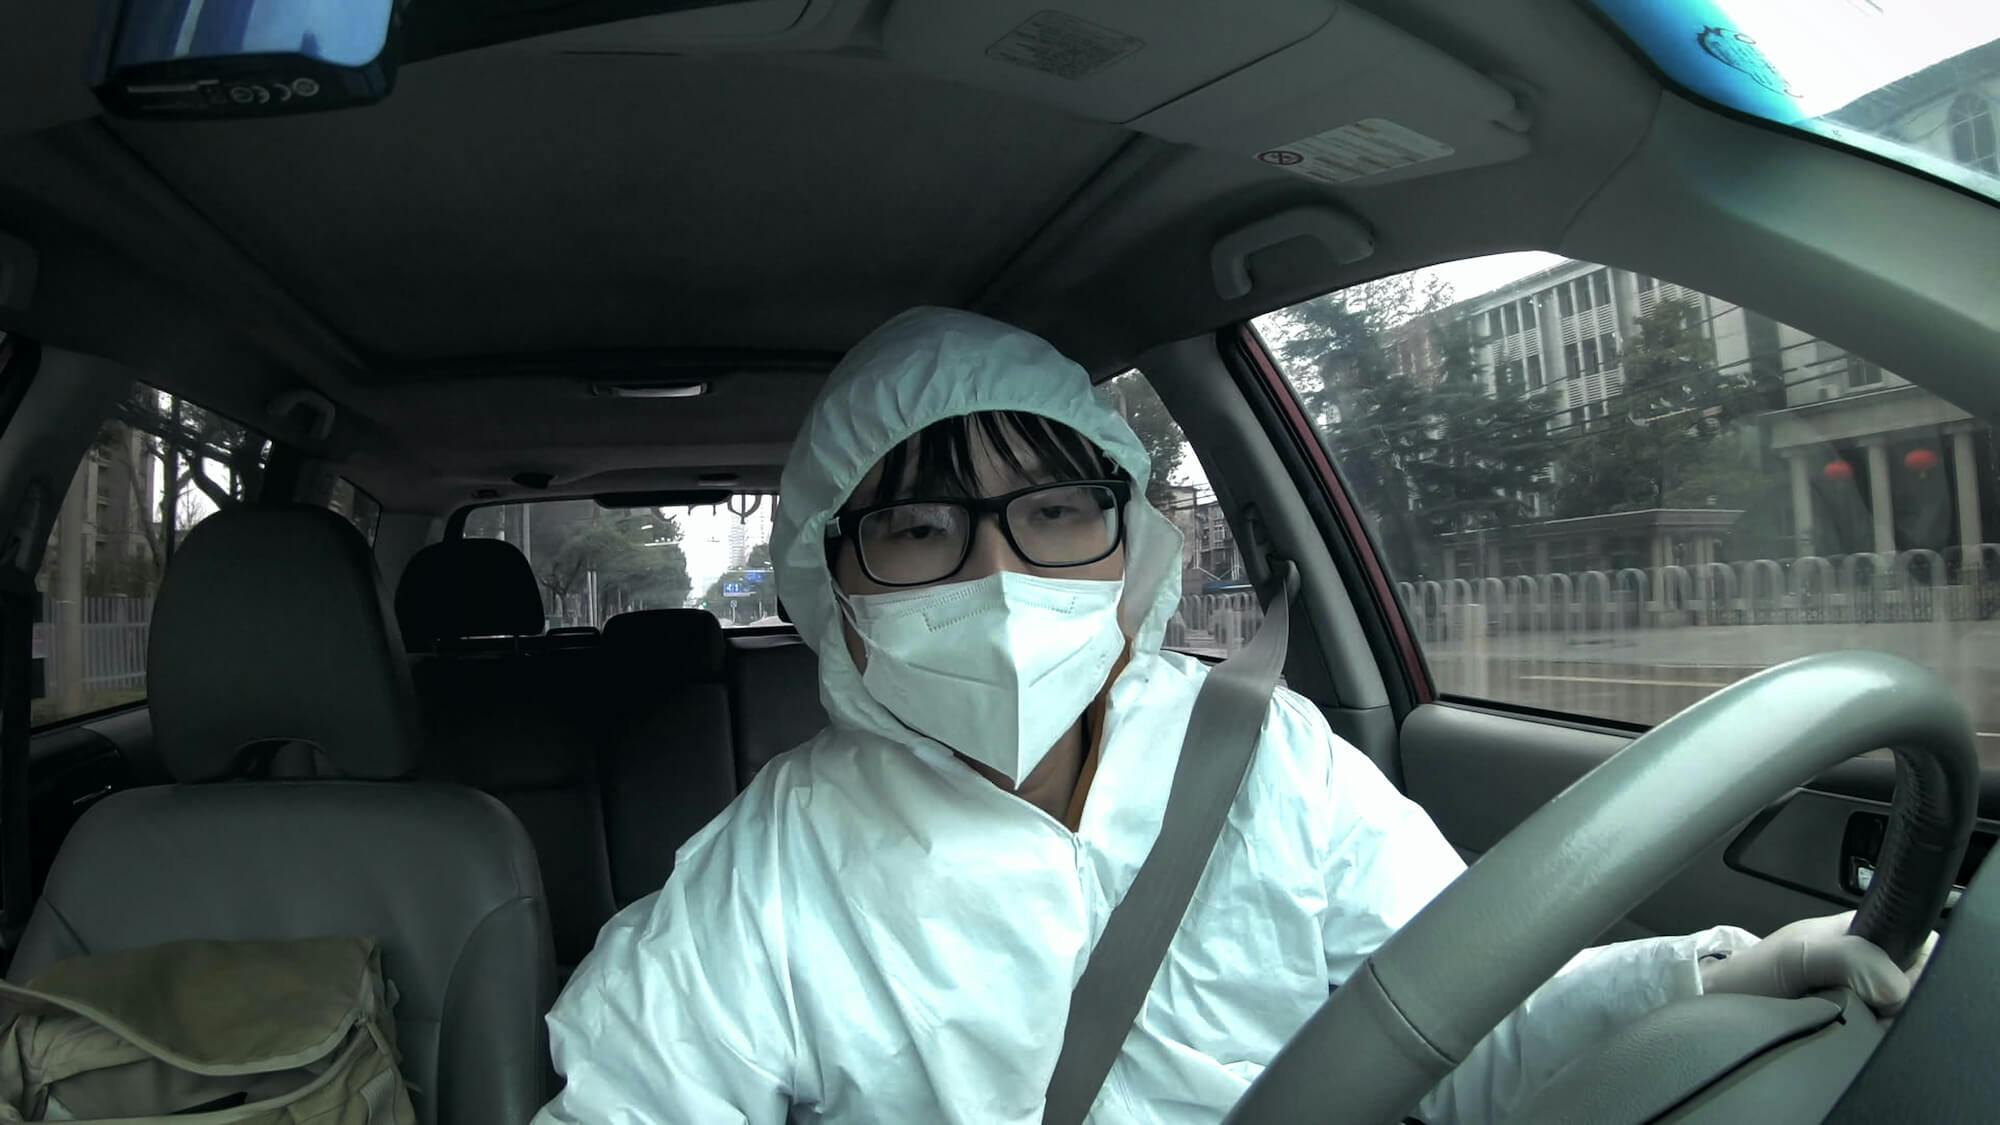 Wenhua Lin, Wuhan wears white full body protective gear as he drives a car.